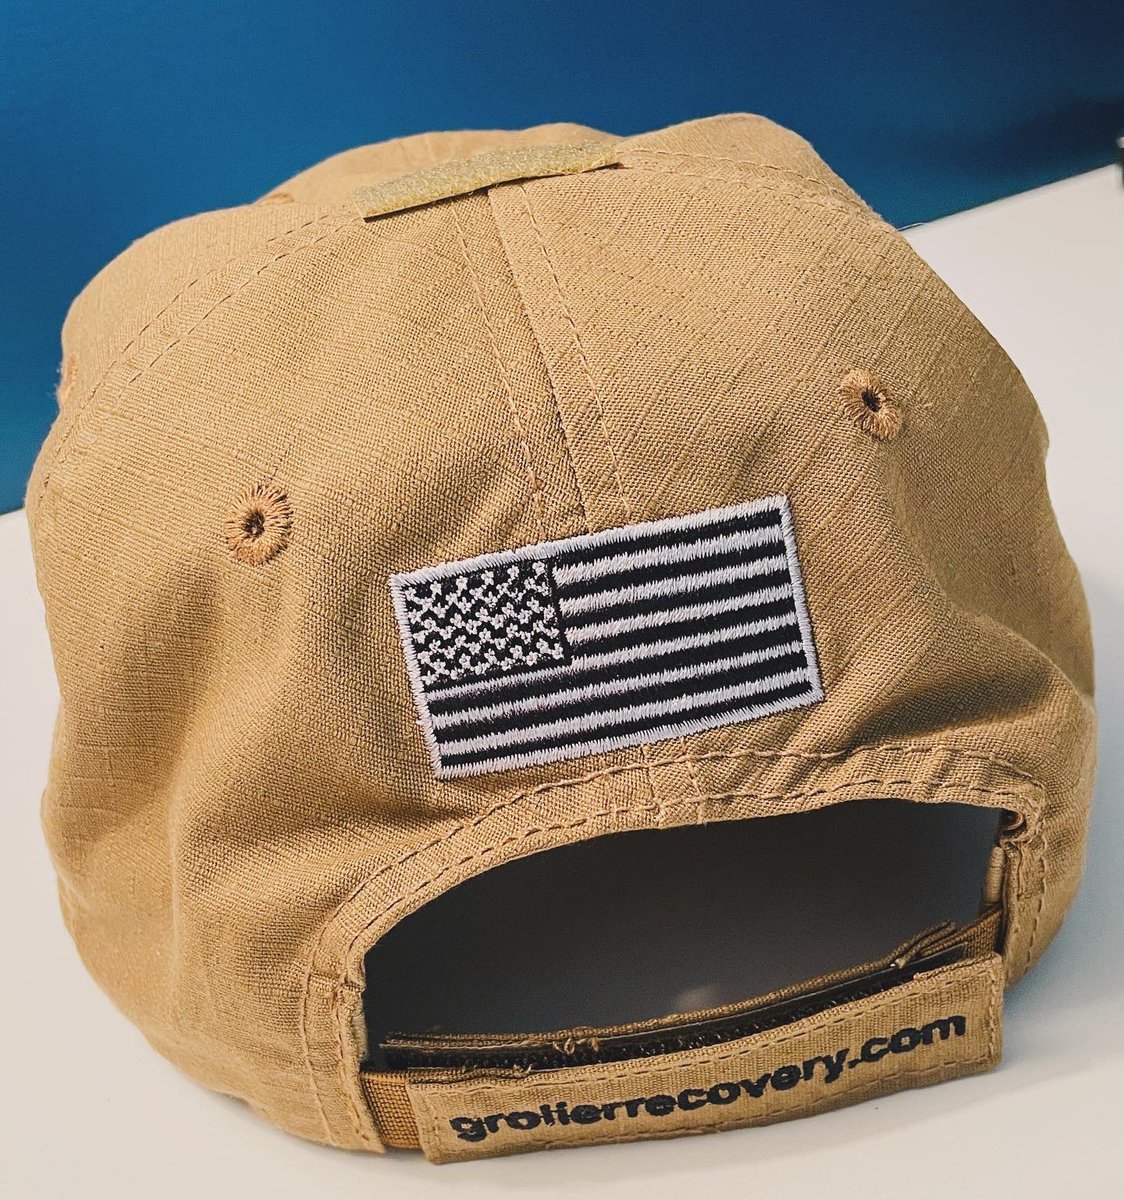 You asked and we delivered. Grolier Recovery Services hats are on the way and ready for preorder now! Preorders will be shipped by May 14th. Click to place your order: Taskforceteamkit.com